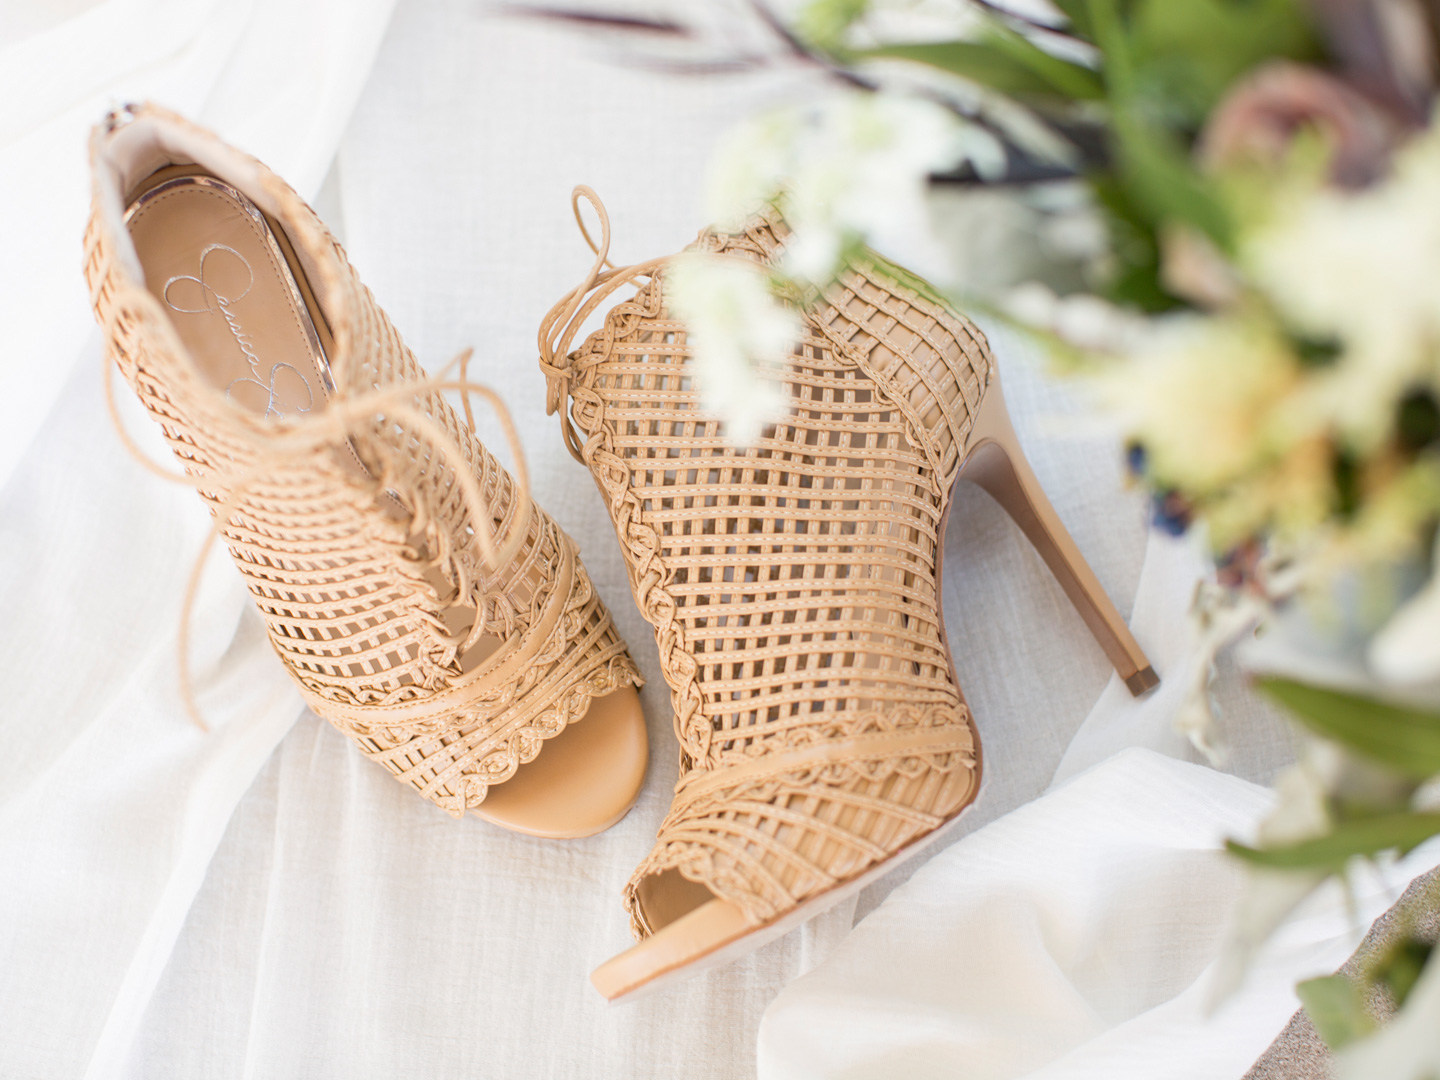 bespoke, jessica simpson, wedding shoes, victorian styled session, tiger gardens, the muny, film